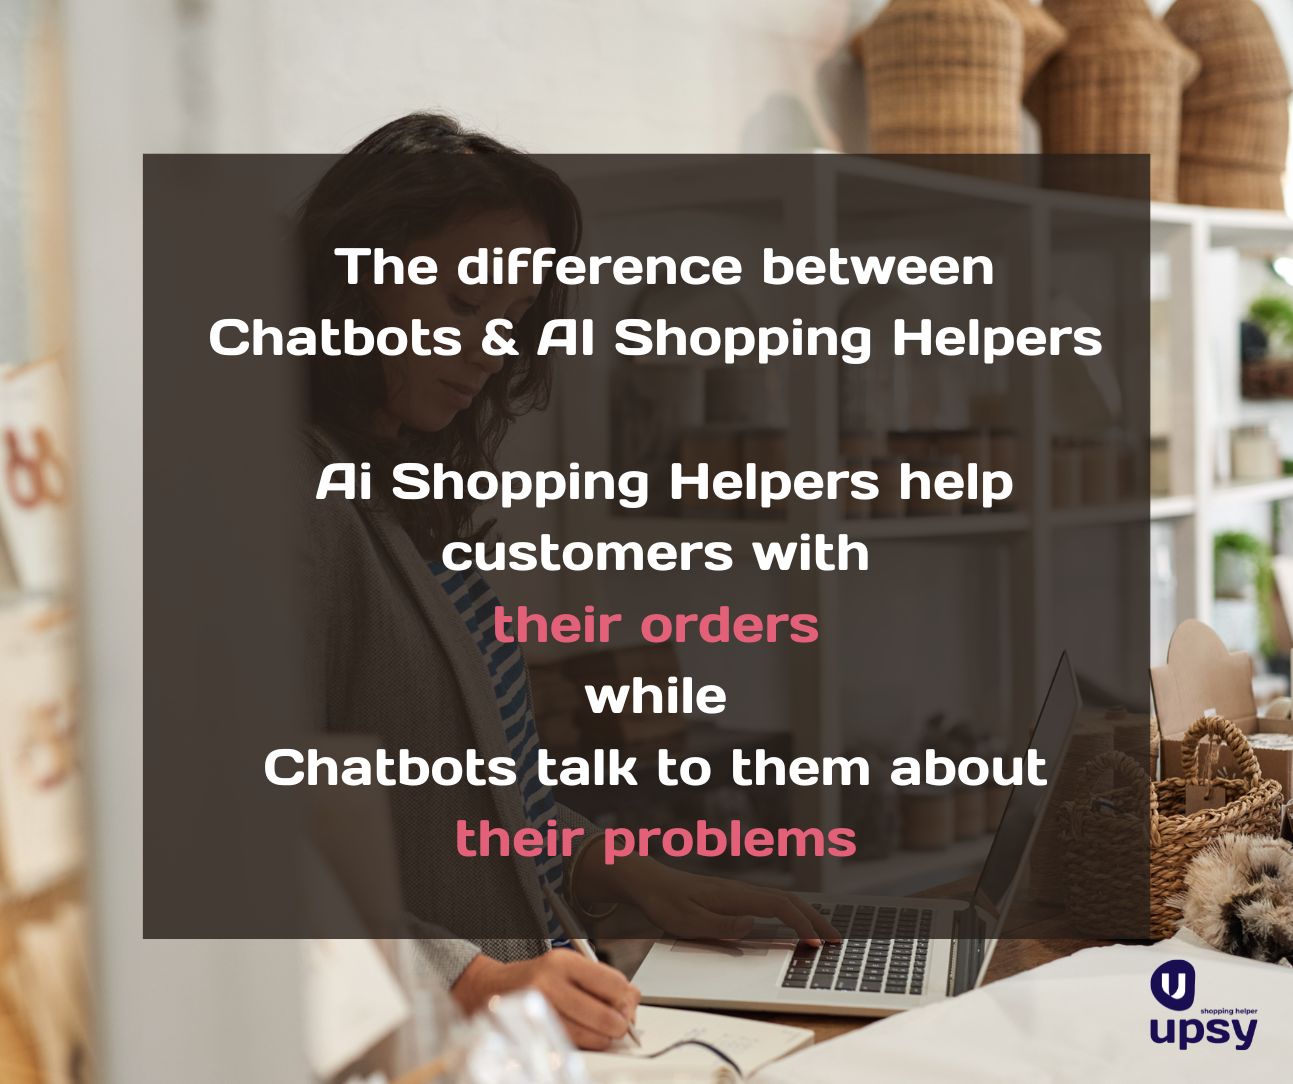 On webshop, the differences between chalkboard and AI shopping assistant